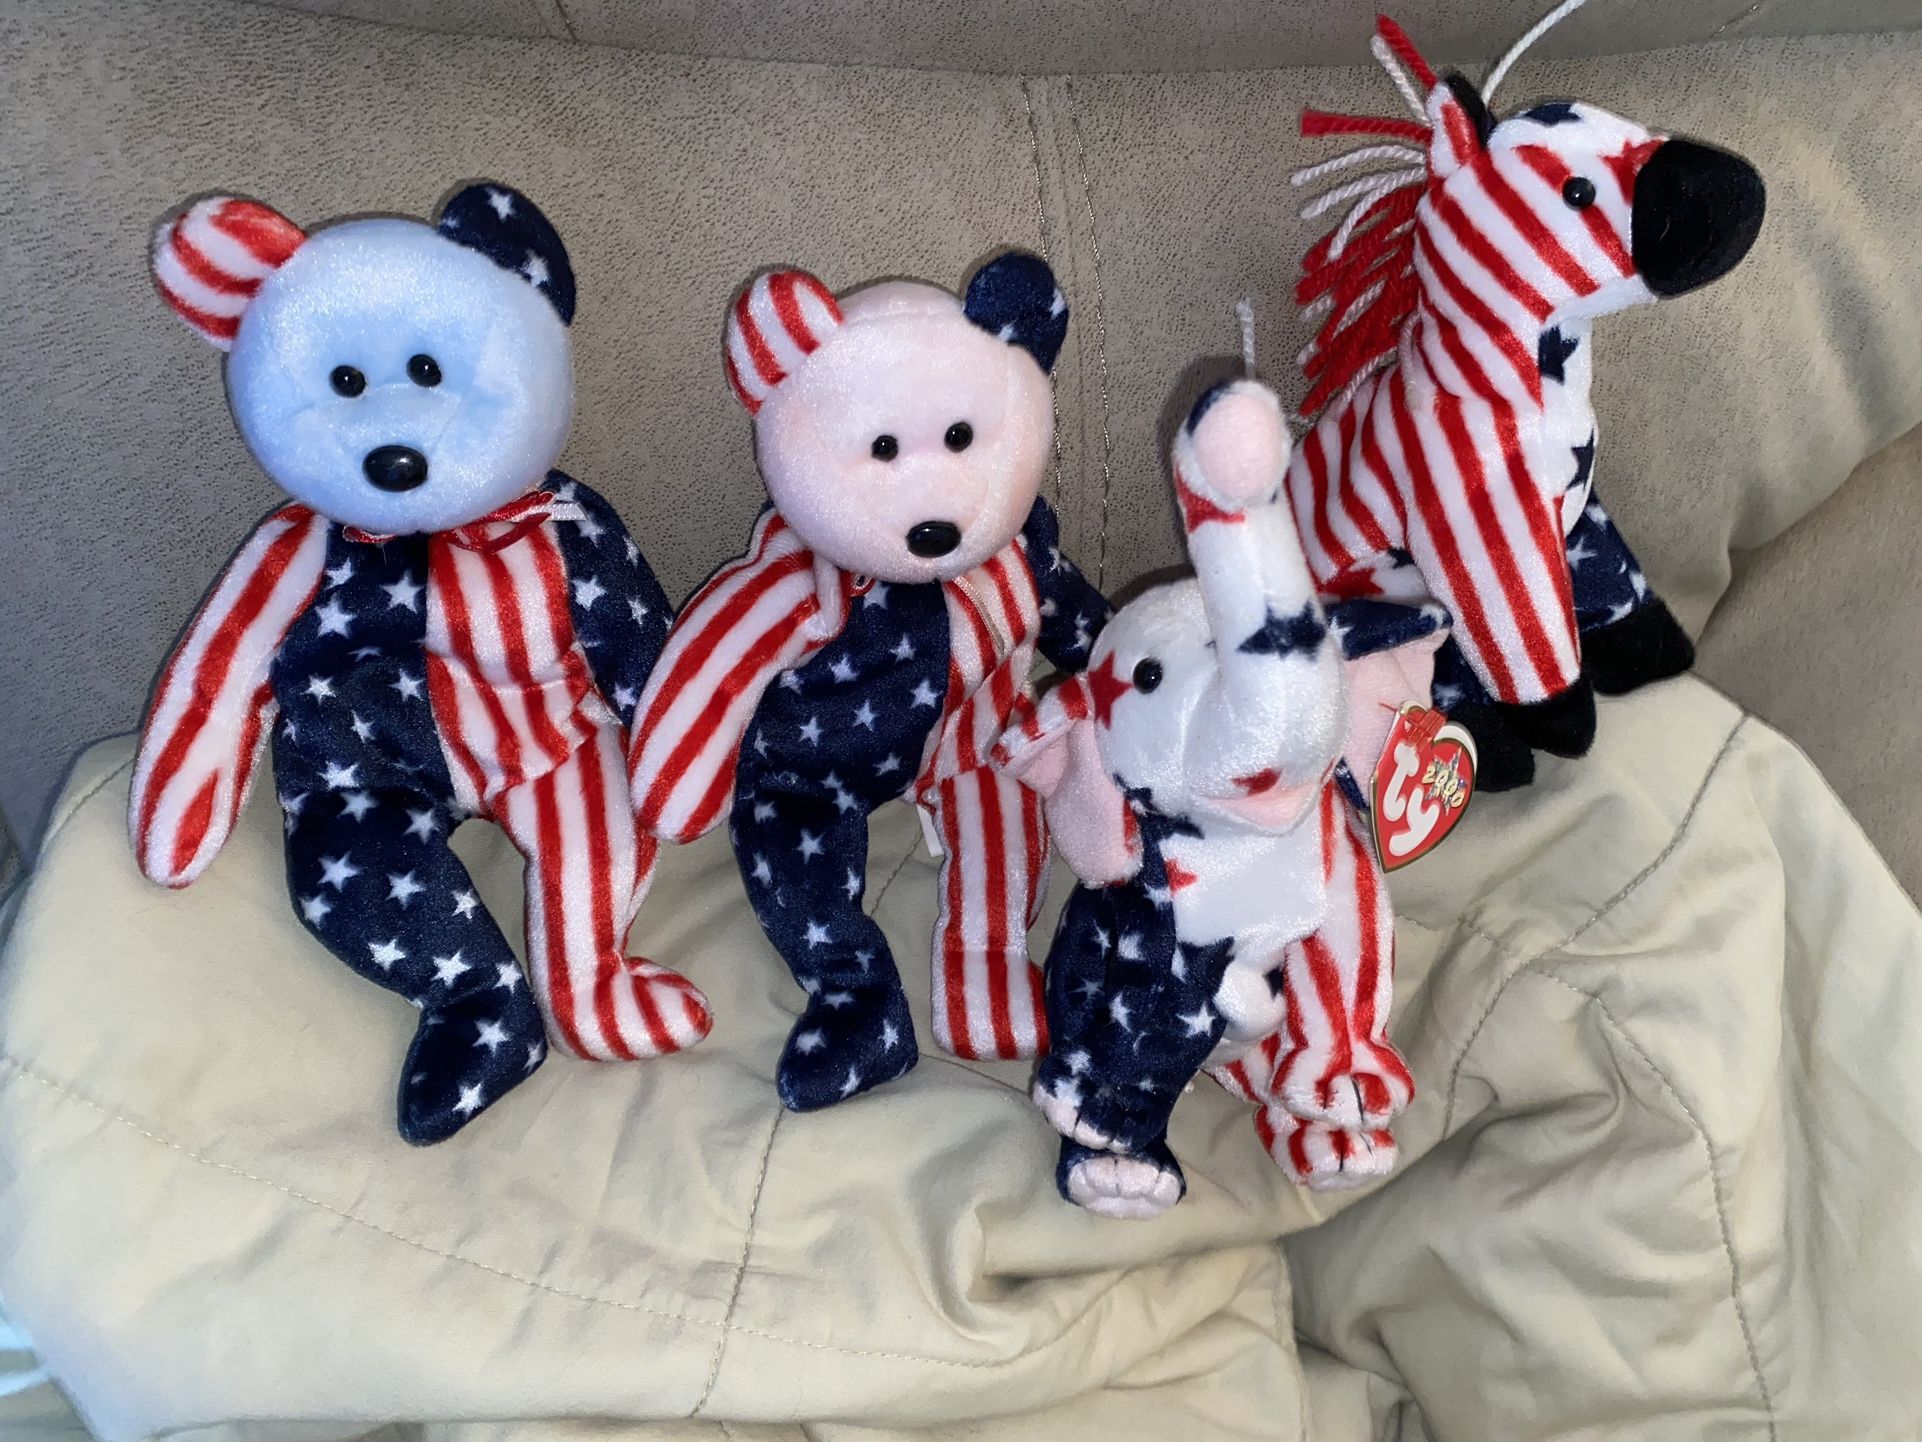 TY Beanie Baby Left and Right Political Elephant and Donkey plus Two Spangle the Bear $18 Takes All